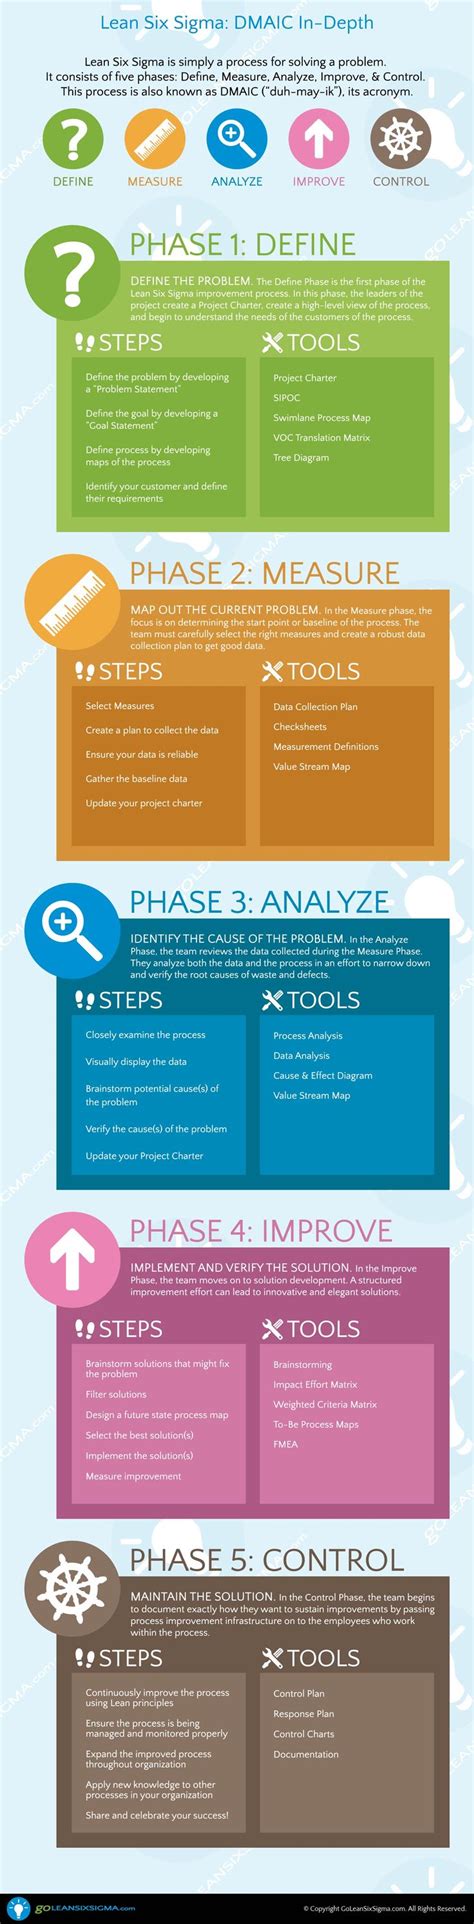 Lean Six Sigma Step By Step DMAIC Infographic GoLeanSixSigma